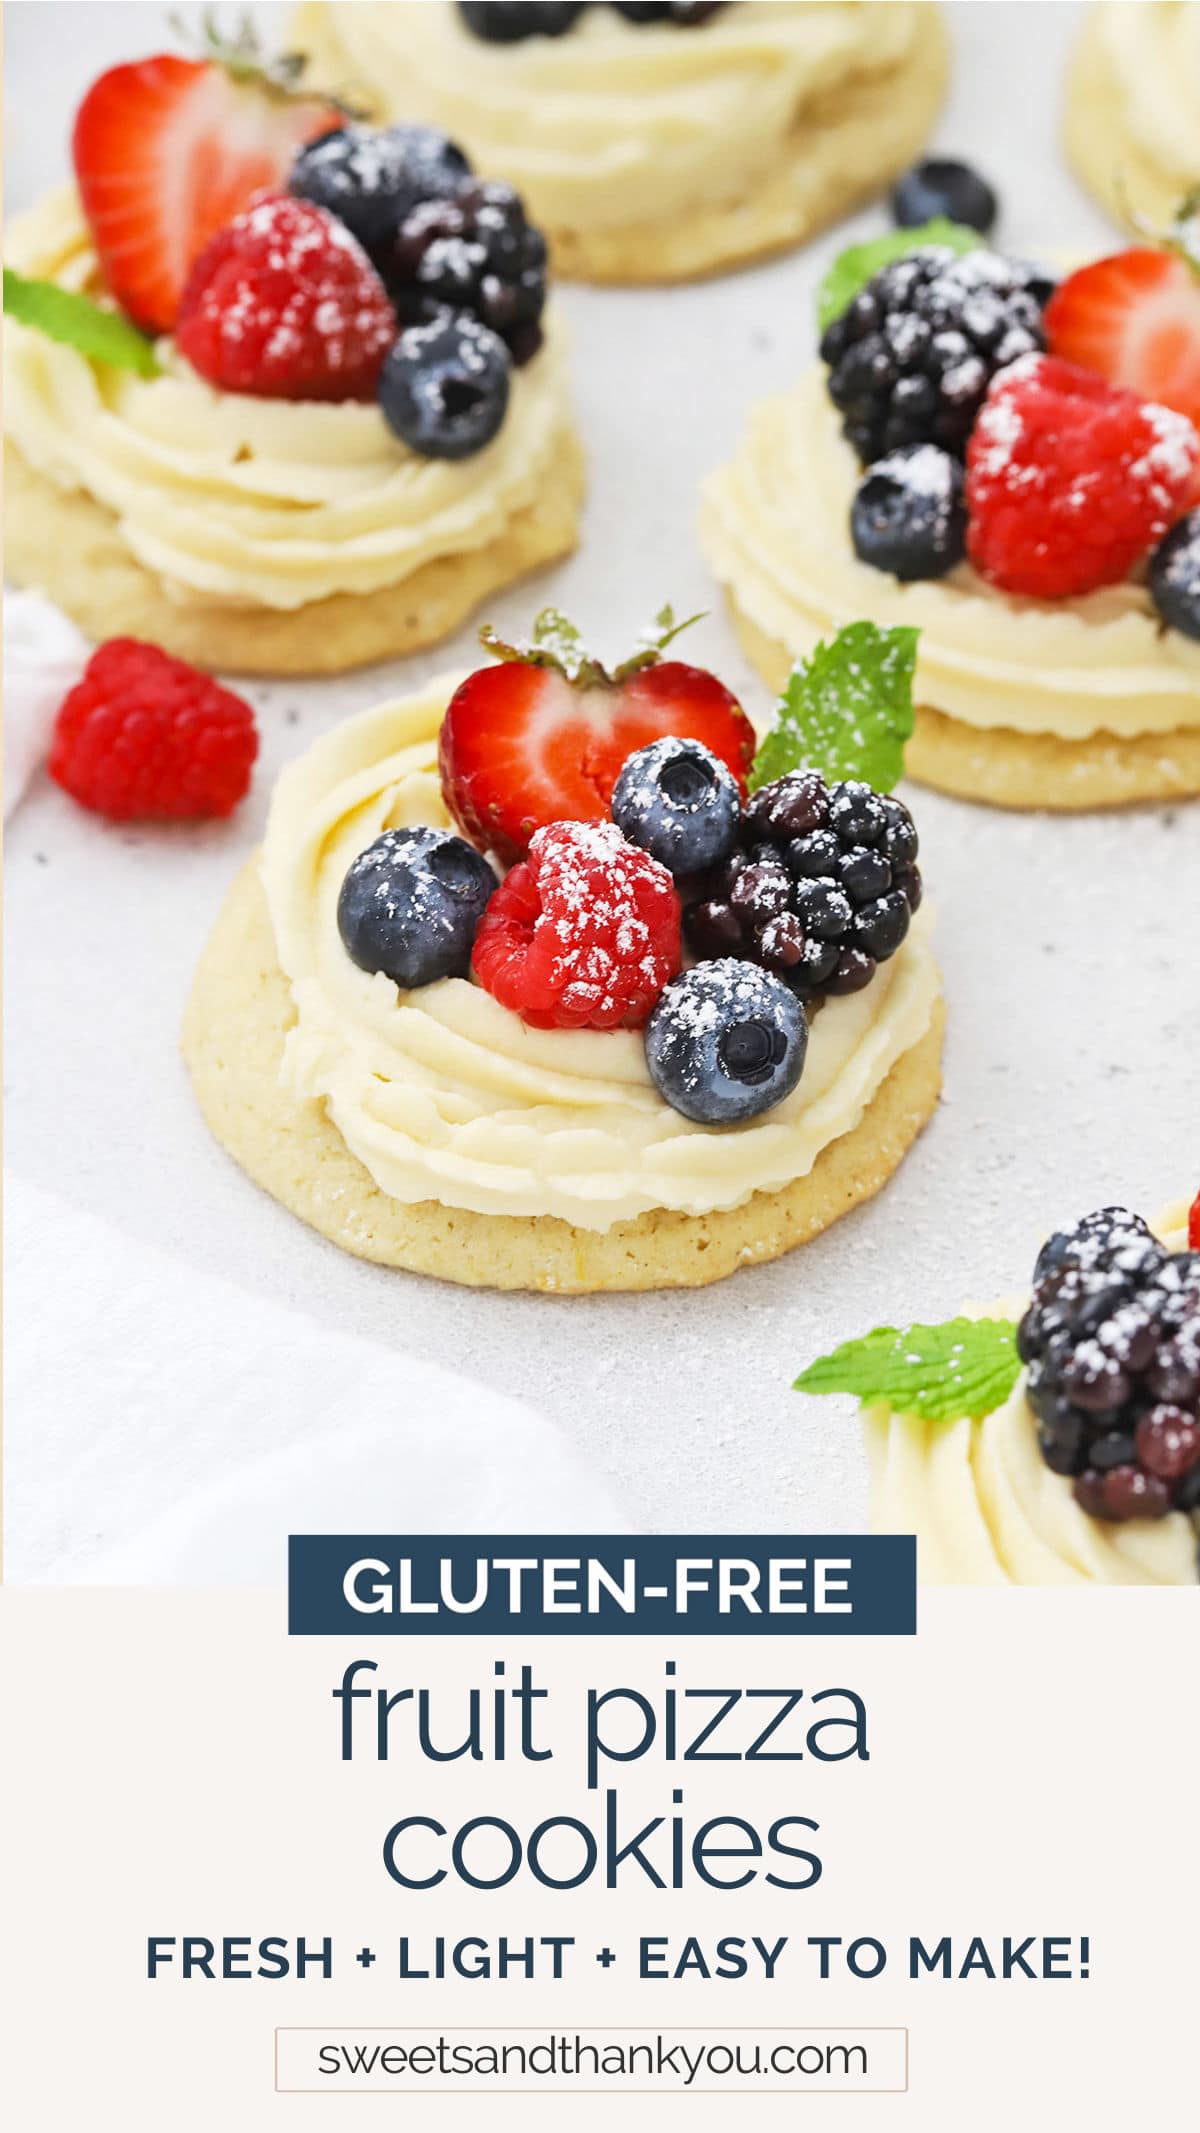 Mini Fruit Pizza Cookies - These mini gluten-free fruit pizzas are made from gluten-Free lemon sugar cookies, a light cream cheese frosting, and fresh berries. They're beautiful and easy! // Gluten-Free Fruit Pizza // Mini Fruit Pizzas // Fruit pizza cookie recipe // Gluten Free lemon cookies #glutenfree #fruitpizza #glutenfreecookies #cookies #lemoncookies